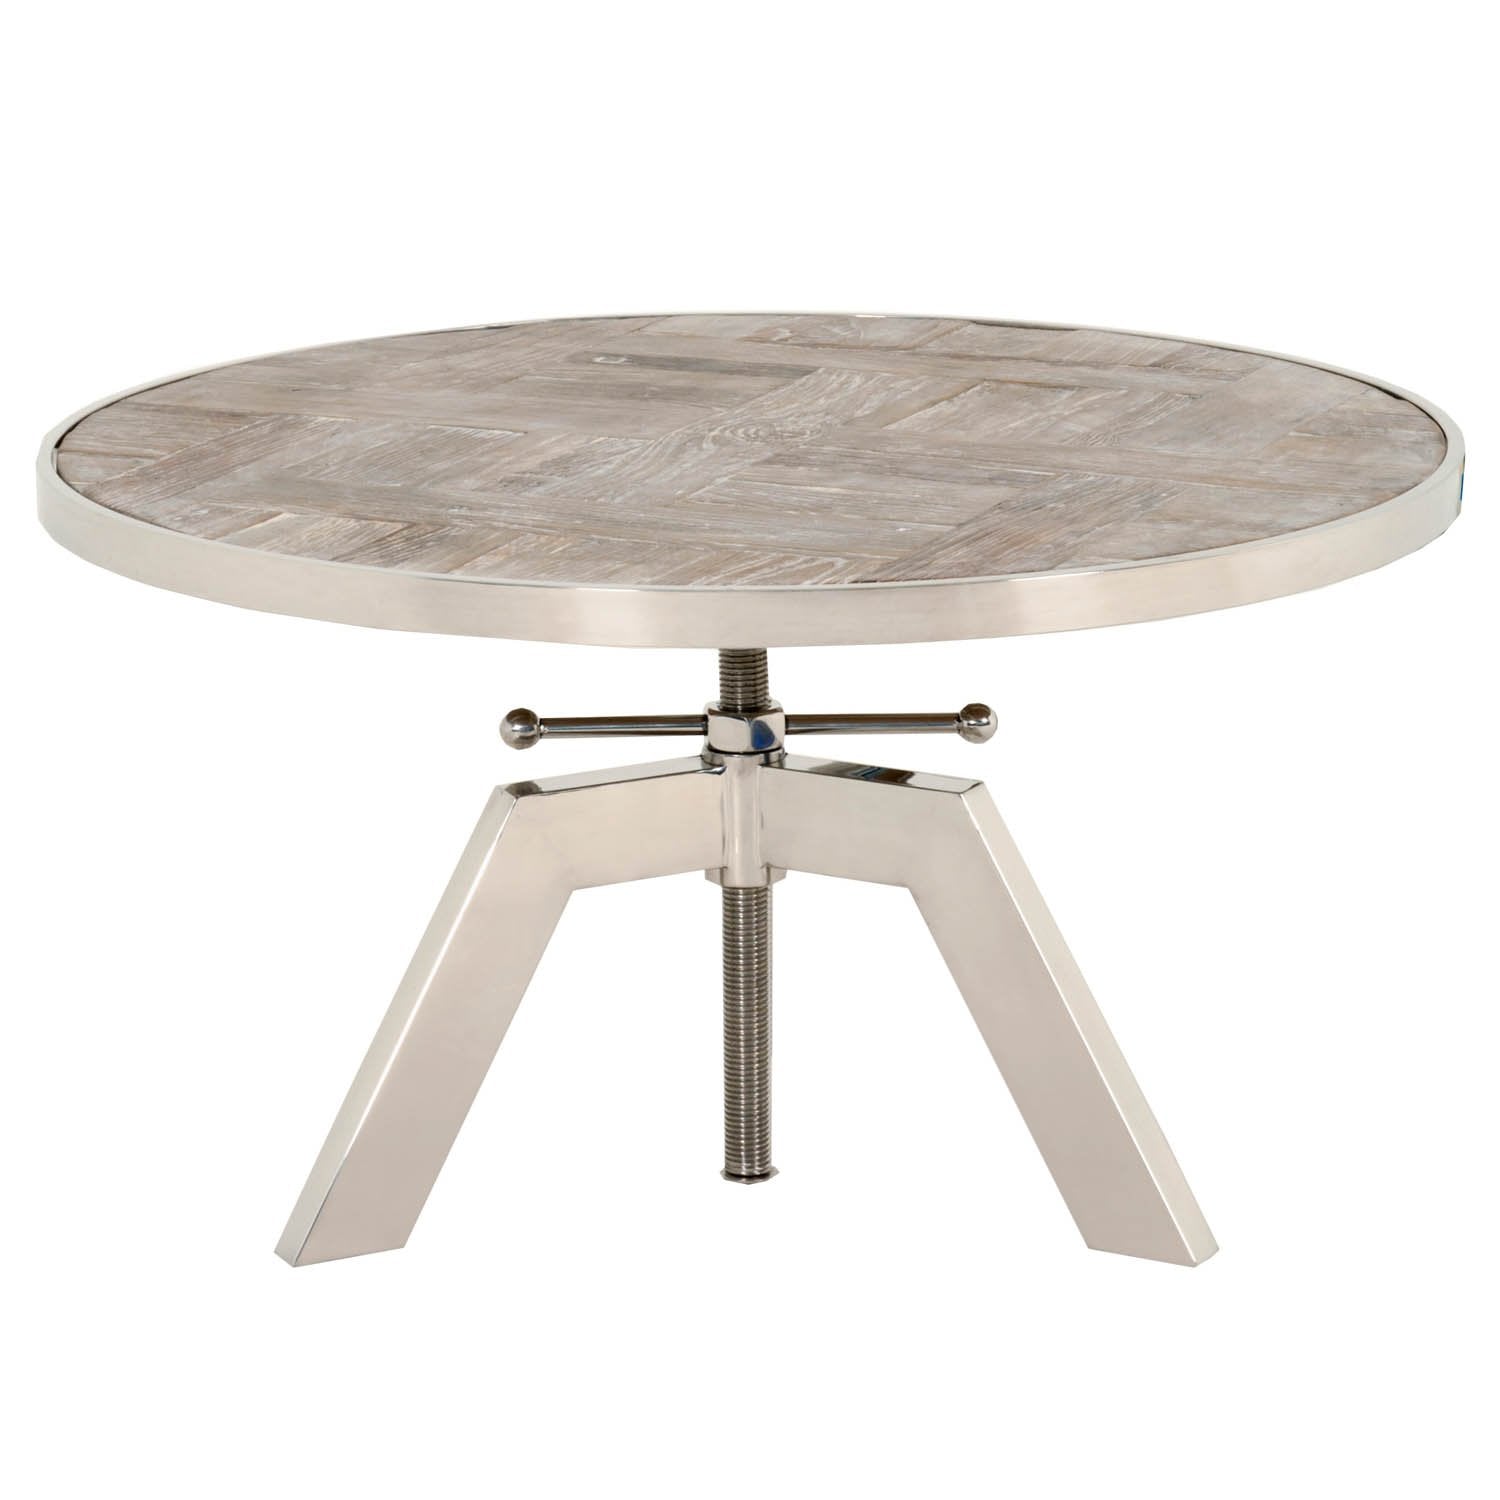 Charlie Round Coffee Table in Weathered Elm